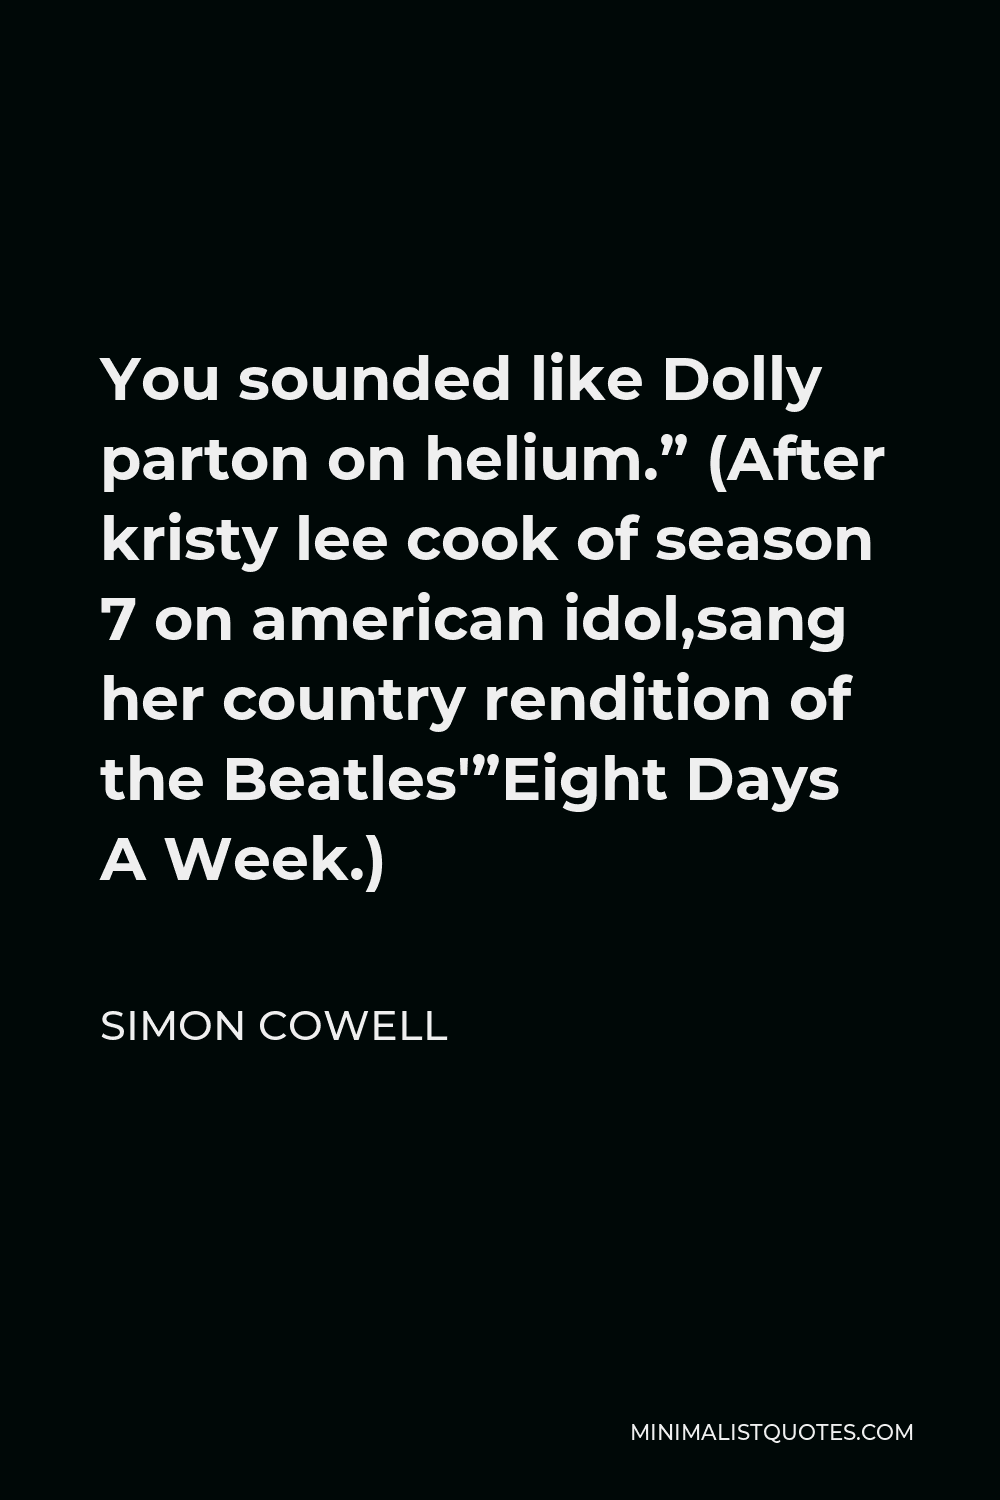 Simon Cowell Quote - You sounded like Dolly parton on helium.” (After kristy lee cook of season 7 on american idol,sang her country rendition of the Beatles'”Eight Days A Week.)